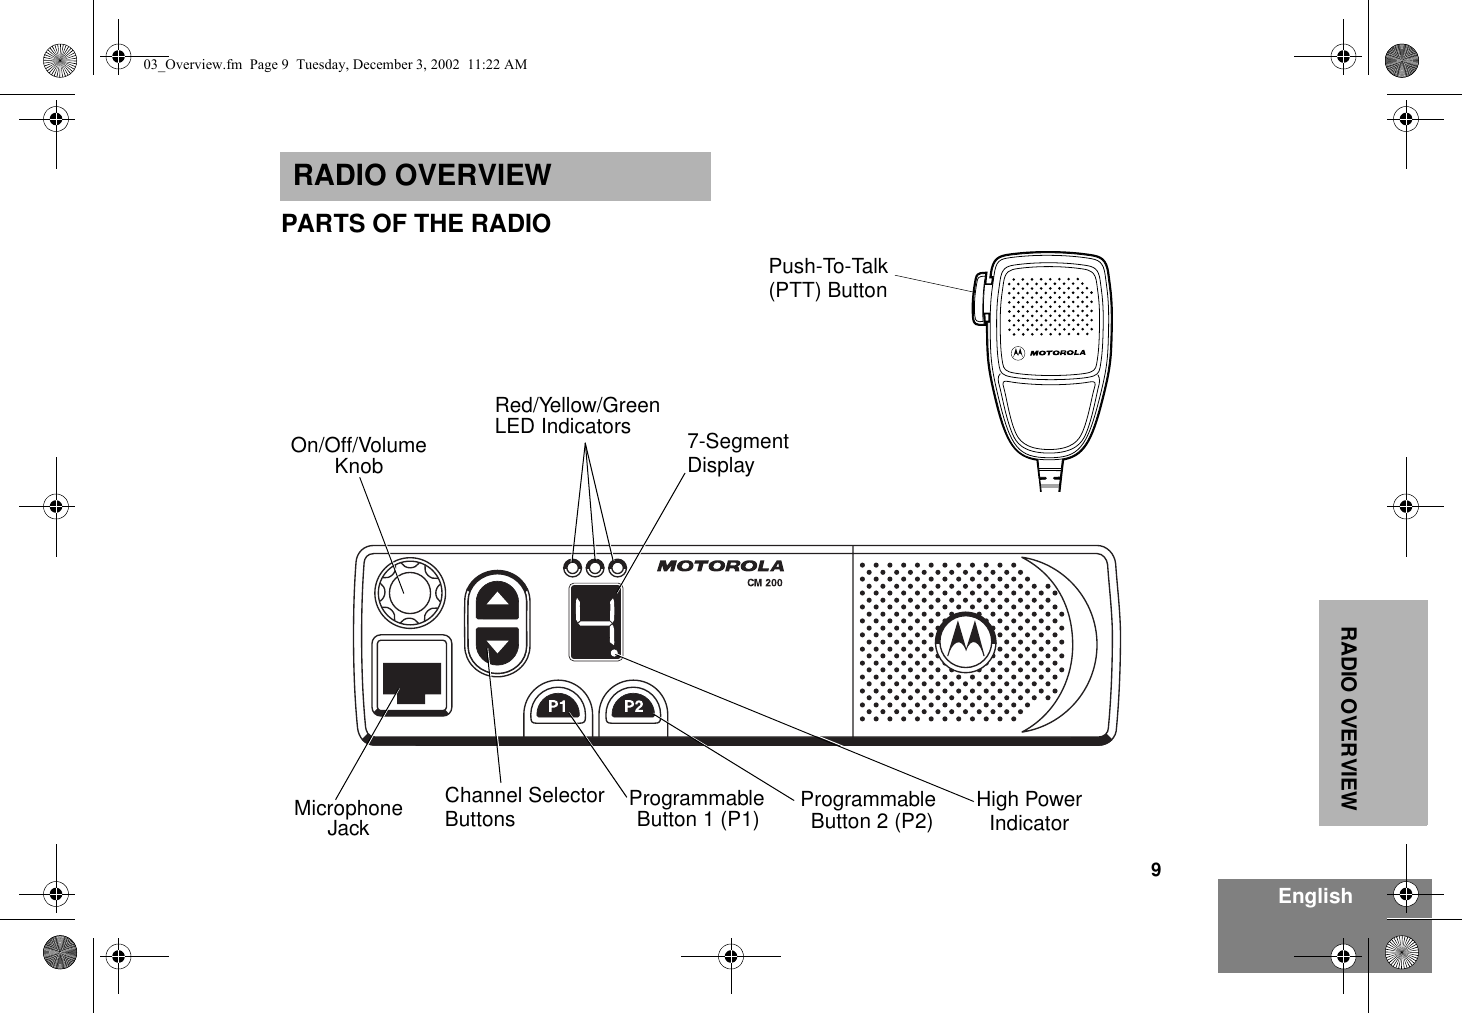 9EnglishRADIO OVERVIEWRADIO OVERVIEWPARTS OF THE RADIORed/Yellow/GreenLED IndicatorsButton 1 (P1)MicrophoneJackKnobOn/Off/VolumeProgrammable7-SegmentDisplayProgrammableButton 2 (P2)Channel SelectorButtonsPush-To-Talk(PTT) ButtonHigh PowerIndicator03_Overview.fm  Page 9  Tuesday, December 3, 2002  11:22 AM